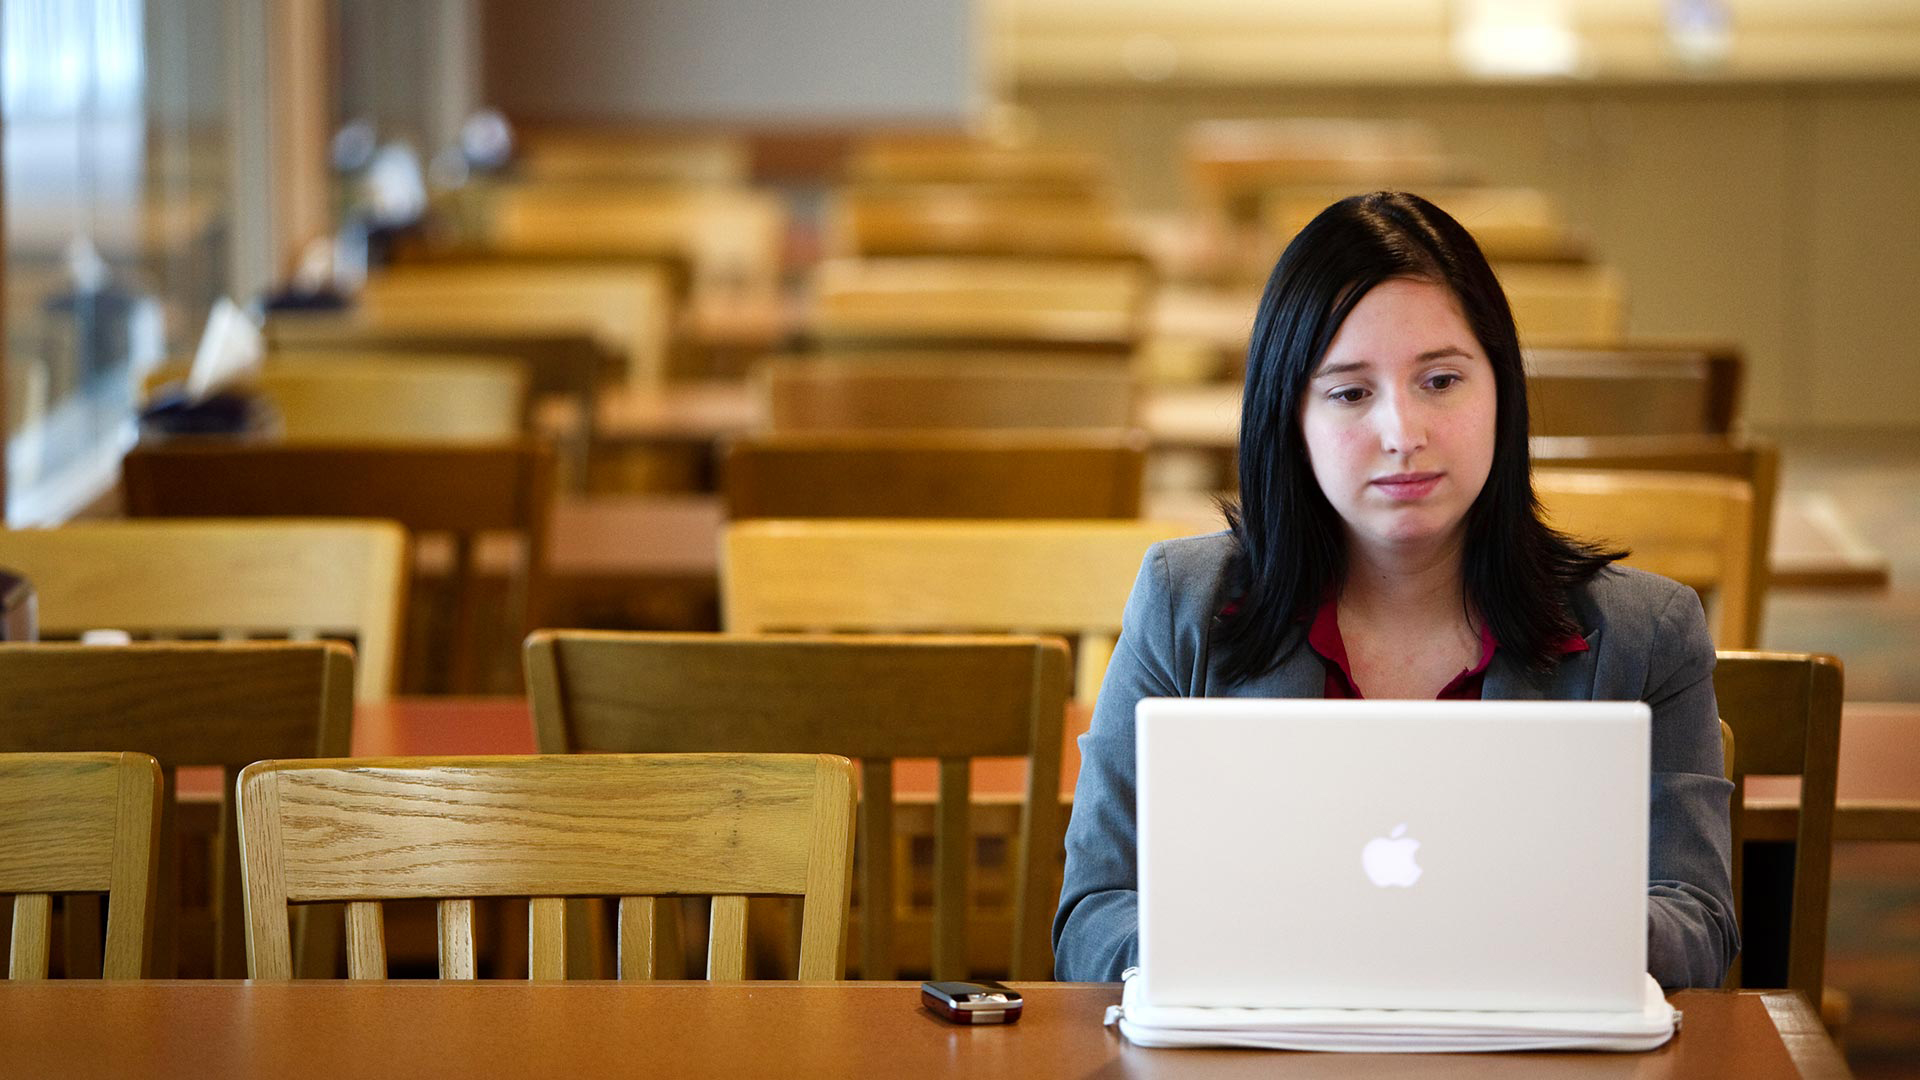 An Opus College of Business graduate student works on her laptop